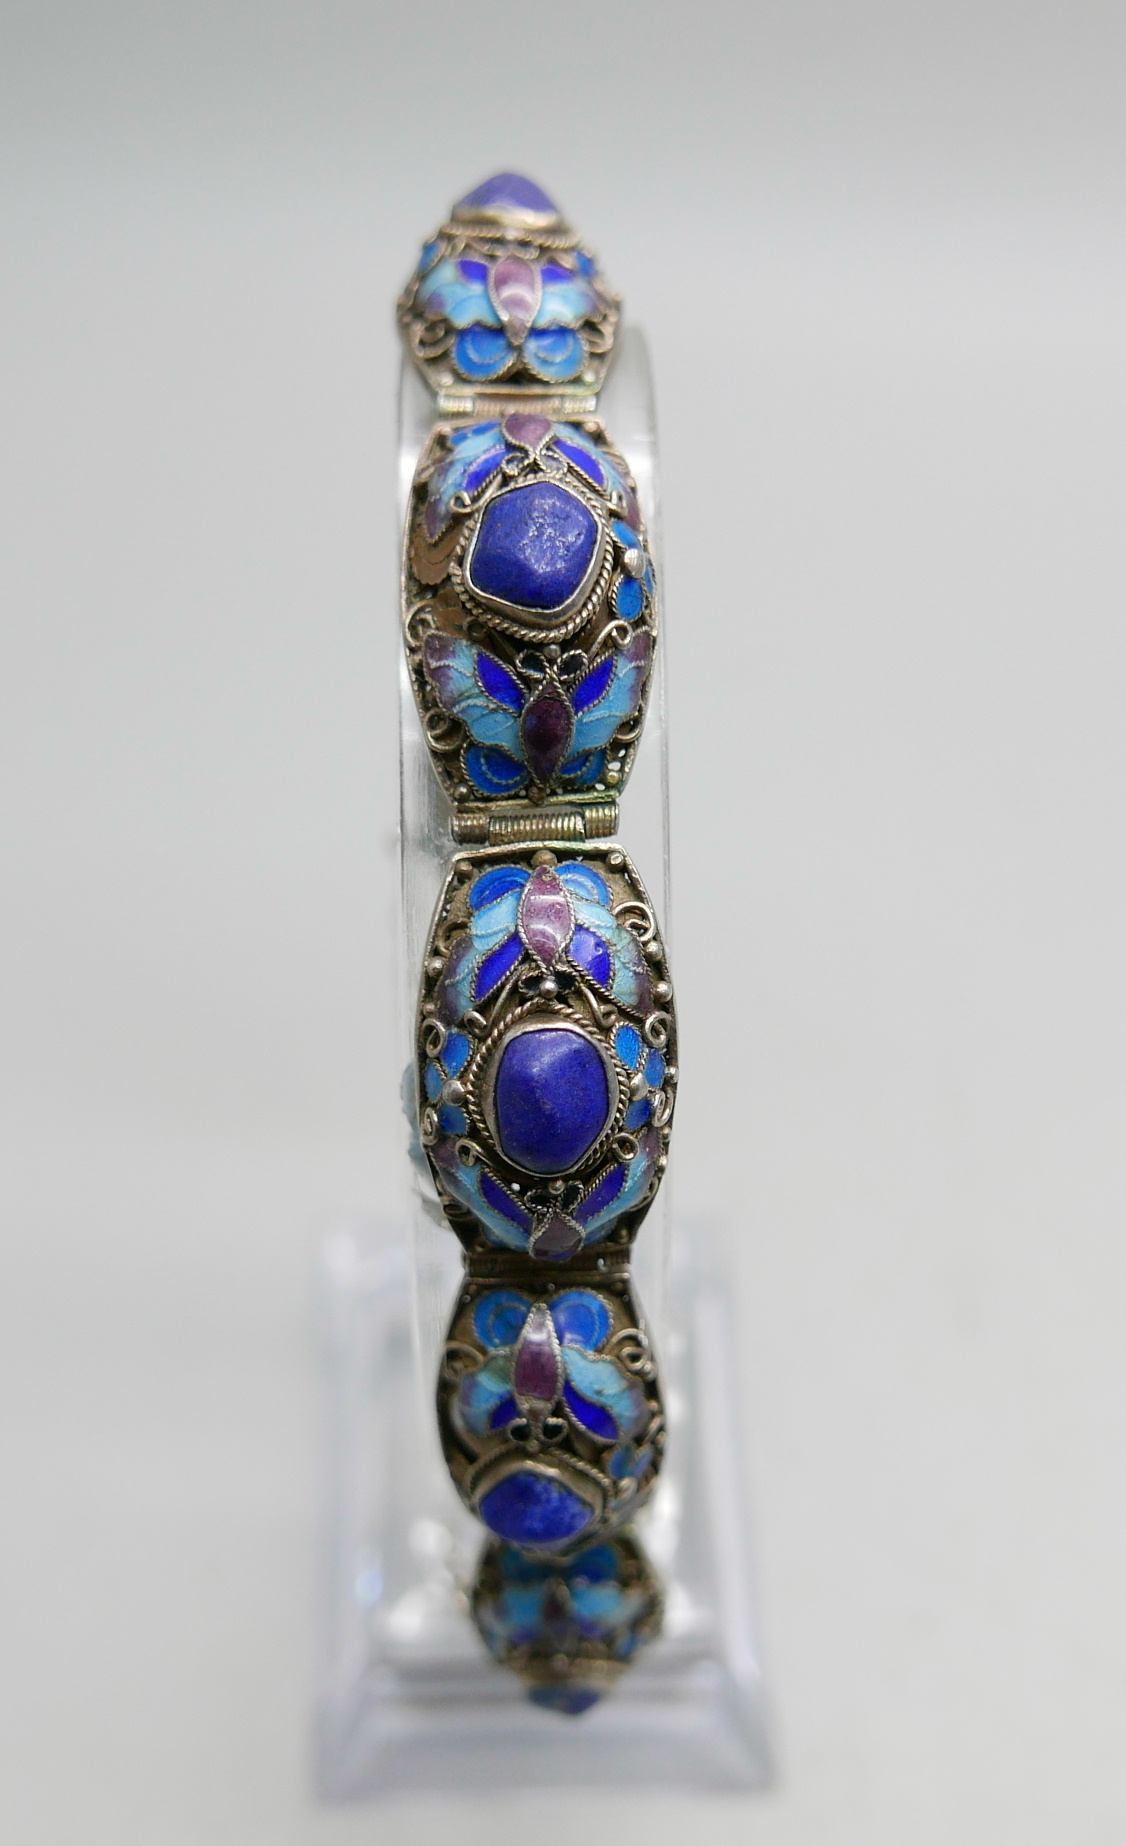 A Chinese vintage enamelled silver bracelet with blue stones - Image 3 of 3